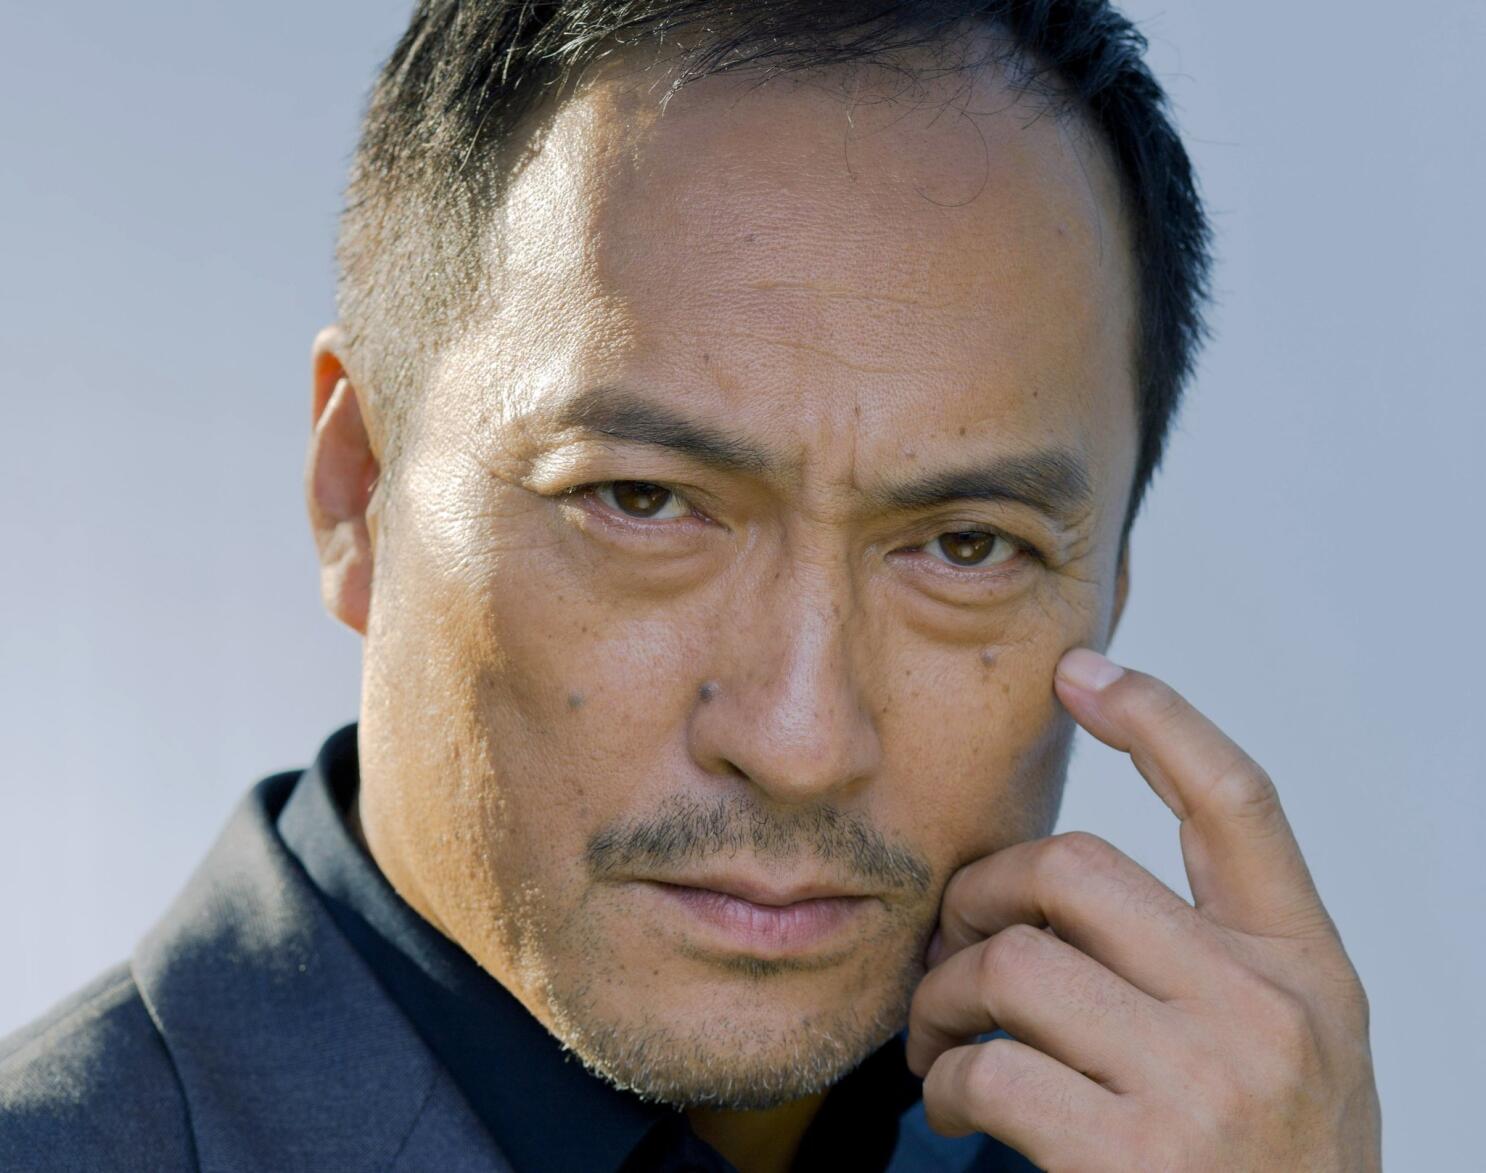 The Dodgers welcomed actor Ken Watanabe to throw out the